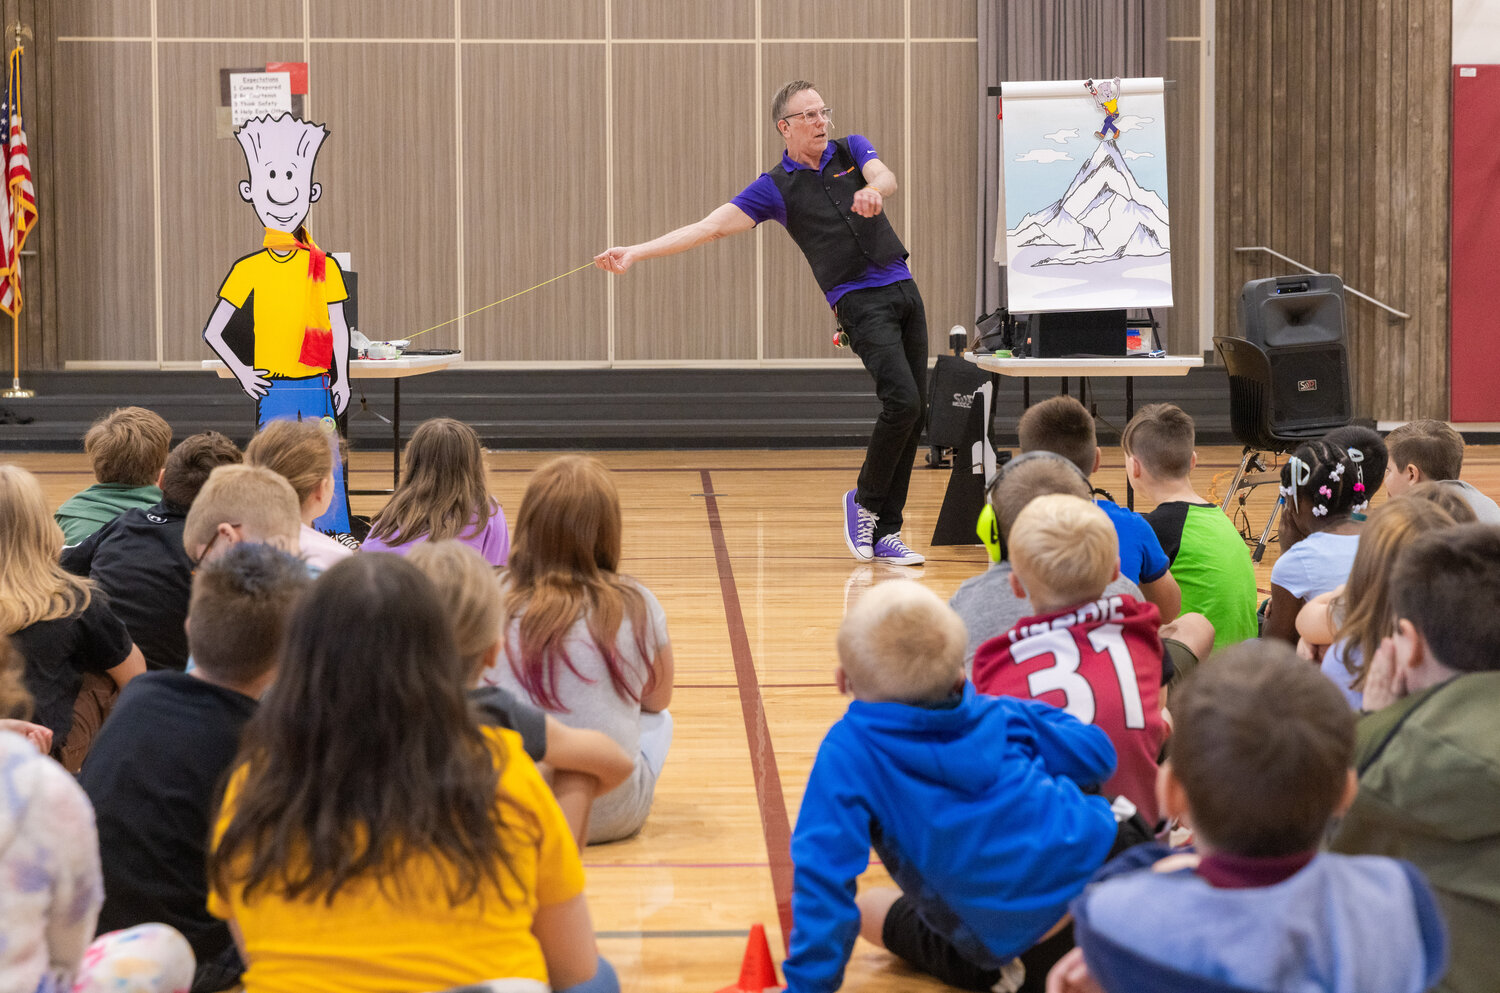 Paul, a professional yo-yo player, brings NED’s Mindset Mission to Orin C. Smith Elementary School in Chehalis on Friday, Sept. 15.